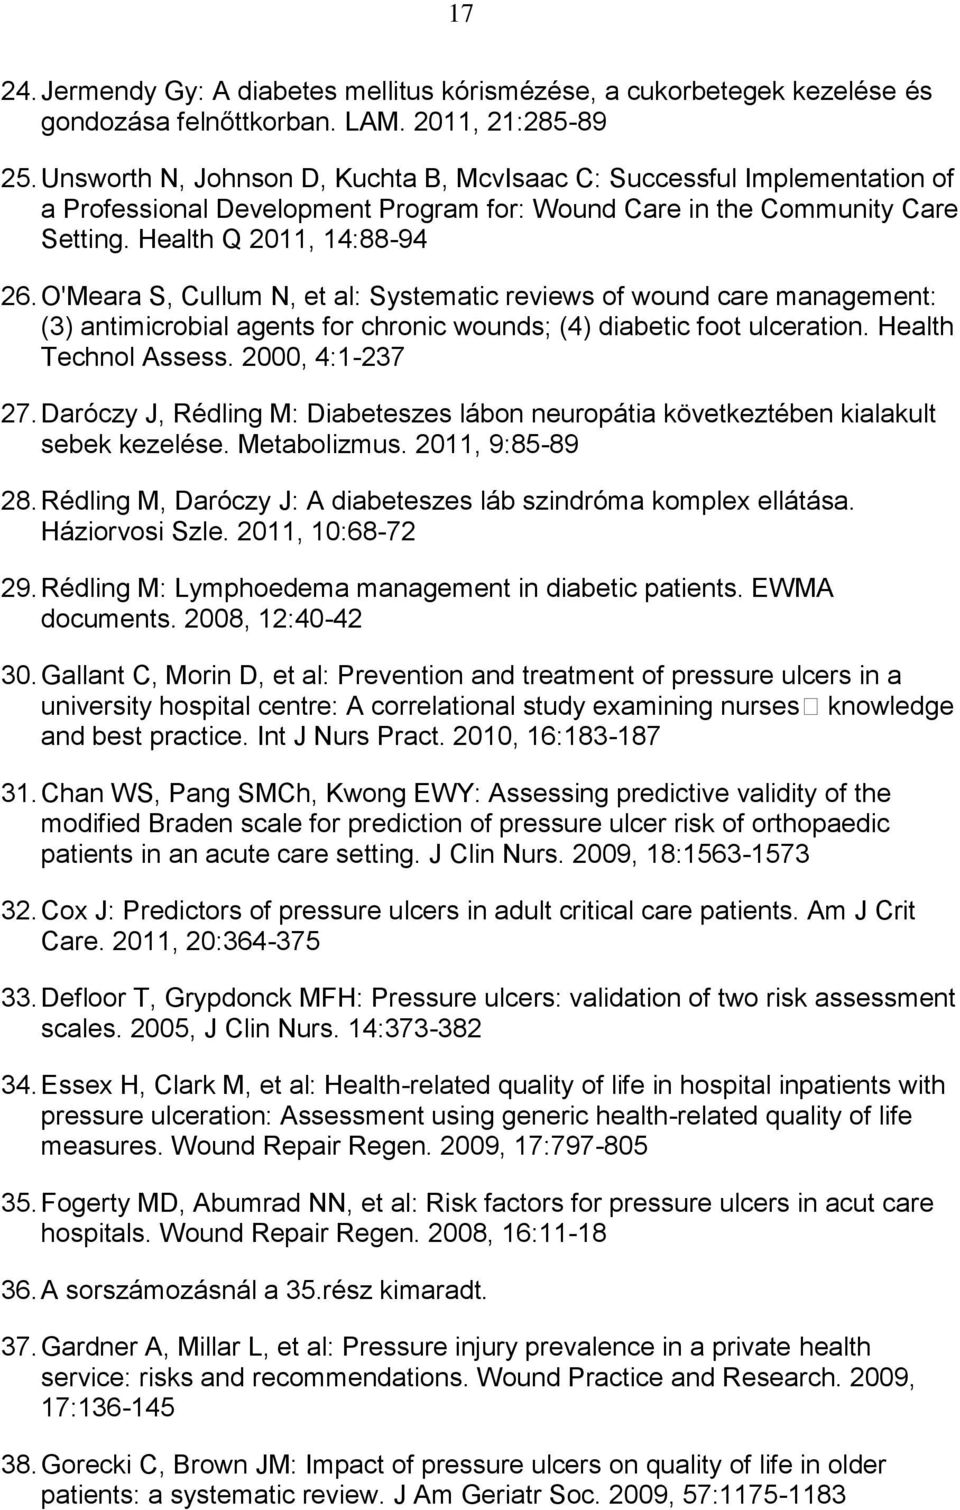 O'Meara S, Cullum N, et al: Systematic reviews of wound care management: (3) antimicrobial agents for chronic wounds; (4) diabetic foot ulceration. Health Technol Assess. 2000, 4:1-237 27.